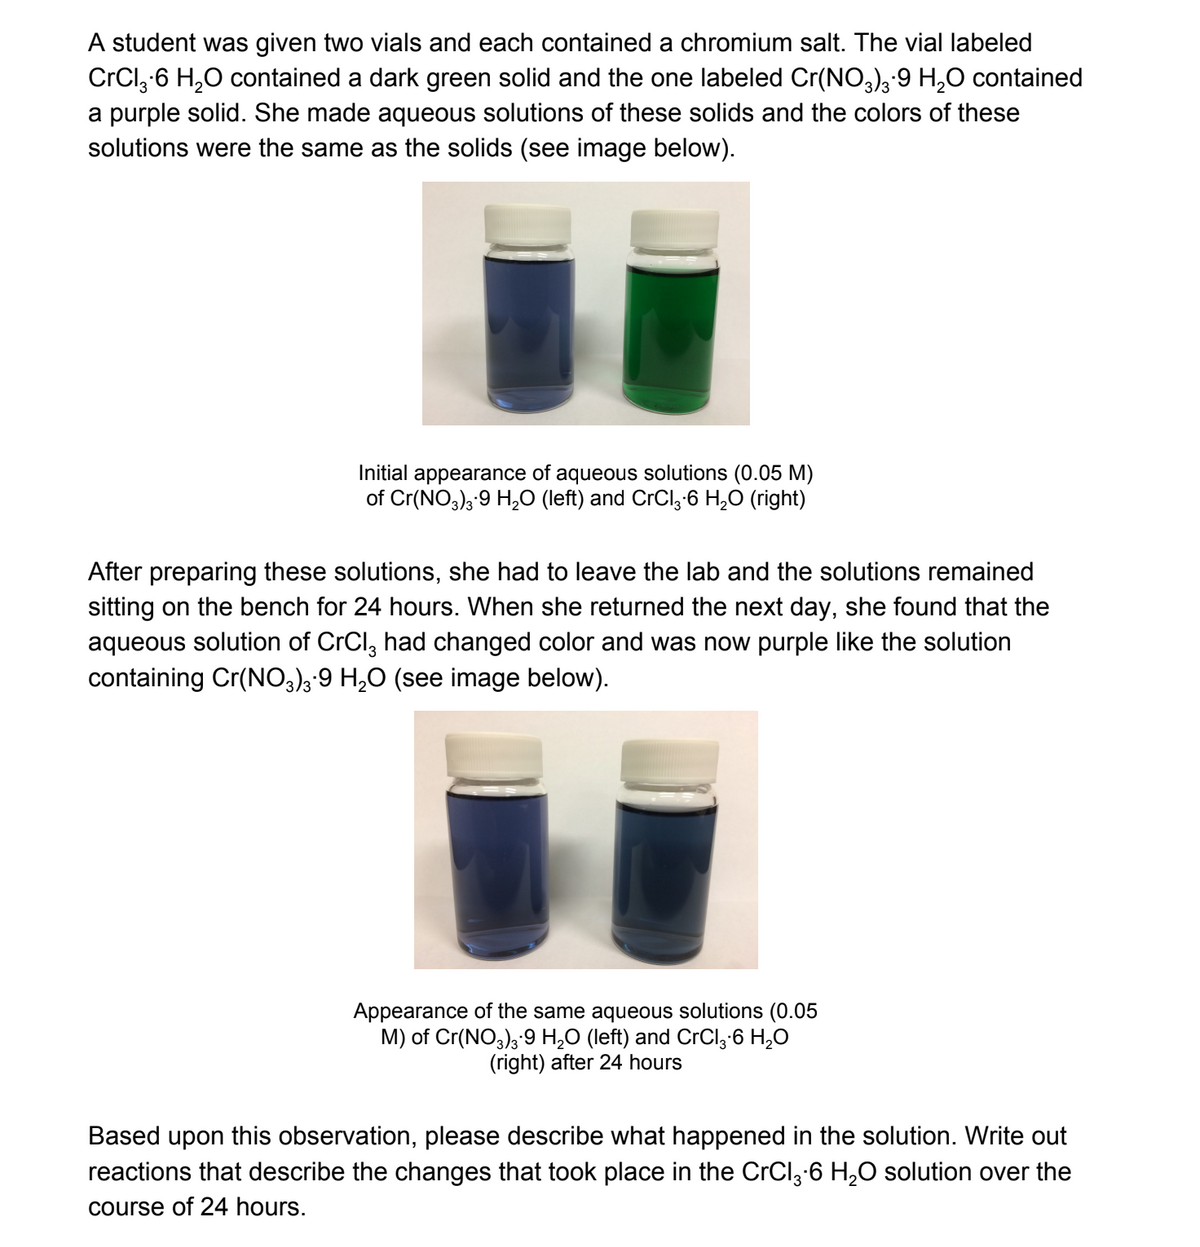 A student was given two vials and each contained a chromium salt. The vial labeled
CrCl,-6 H,0 contained a dark green solid and the one labeled Cr(NO,)3-9 H,0 contained
a purple solid. She made aqueous solutions of these solids and the colors of these
solutions were the same as the solids (see image below).
Initial appearance of aqueous solutions (0.05 M)
of Cr(NO3); 9 H,0O (left) and CrCl; 6 H,O (right)
After preparing these solutions, she had to leave the lab and the solutions remained
sitting on the bench for 24 hours. When she returned the next day, she found that the
aqueous solution of CrCl, had changed color and was now purple like the solution
containing Cr(NO3);'9 H,0 (see image below).
Appearance of the same aqueous solutions (0.05
M) of Cr(NO3); 9 H,O (left) and CrCl;'6 H,O
(right) after 24 hours
Based upon this observation, please describe what happened in the solution. Write out
reactions that describe the changes that took place in the CrCl3-6 H,O solution over the
course of 24 hours.
